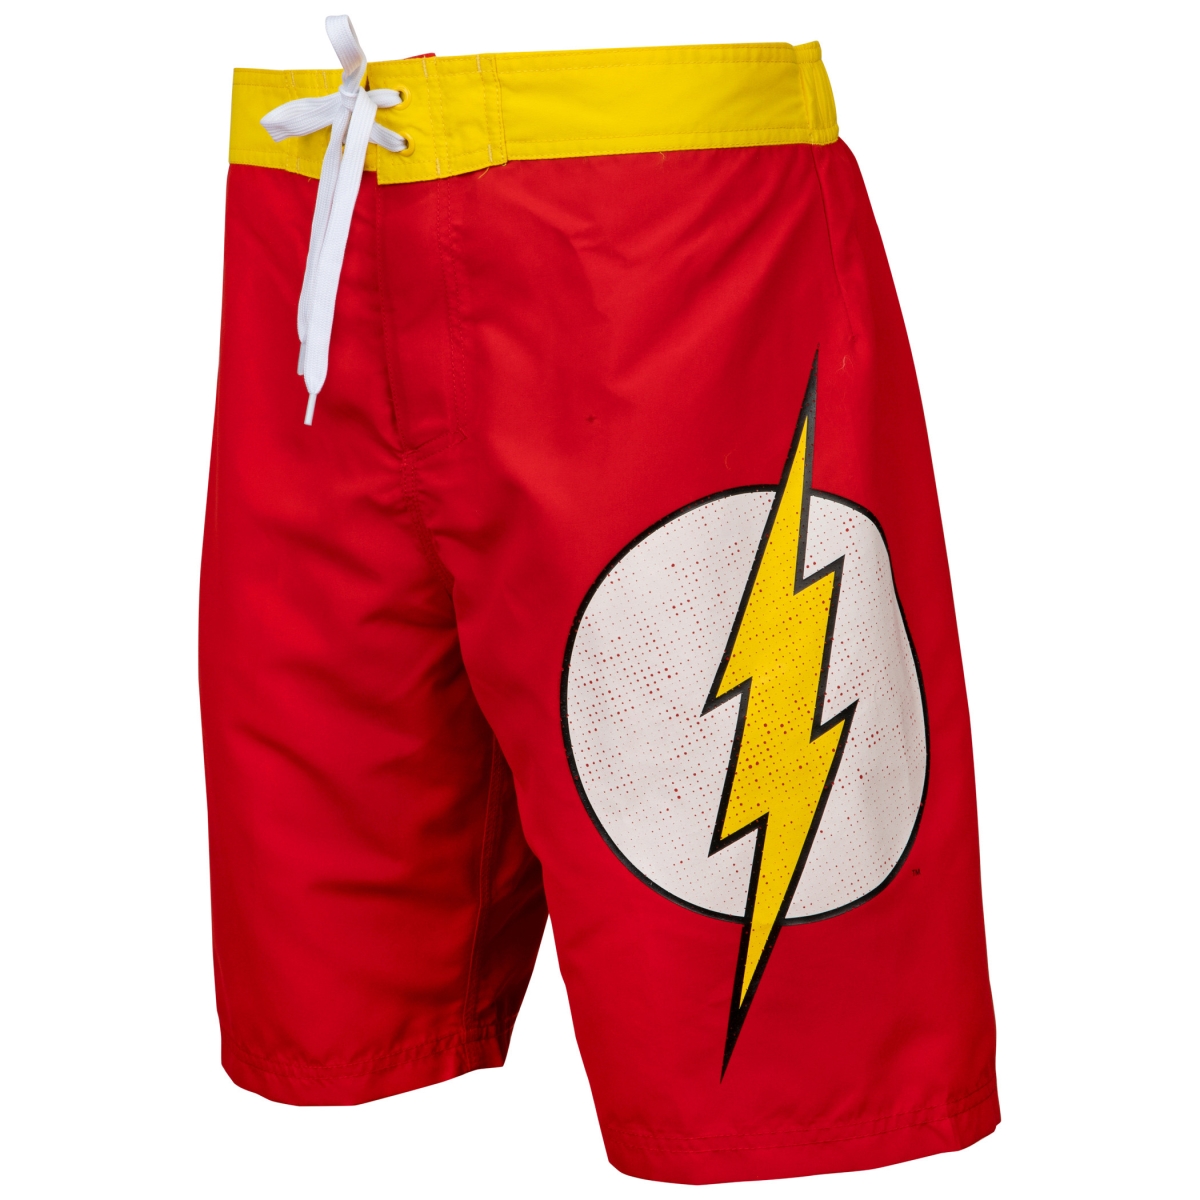 Picture of Flash 803503-xxlarge 44-46 Flash Symbol Board Shorts, Heather Red - 2XL 44-46